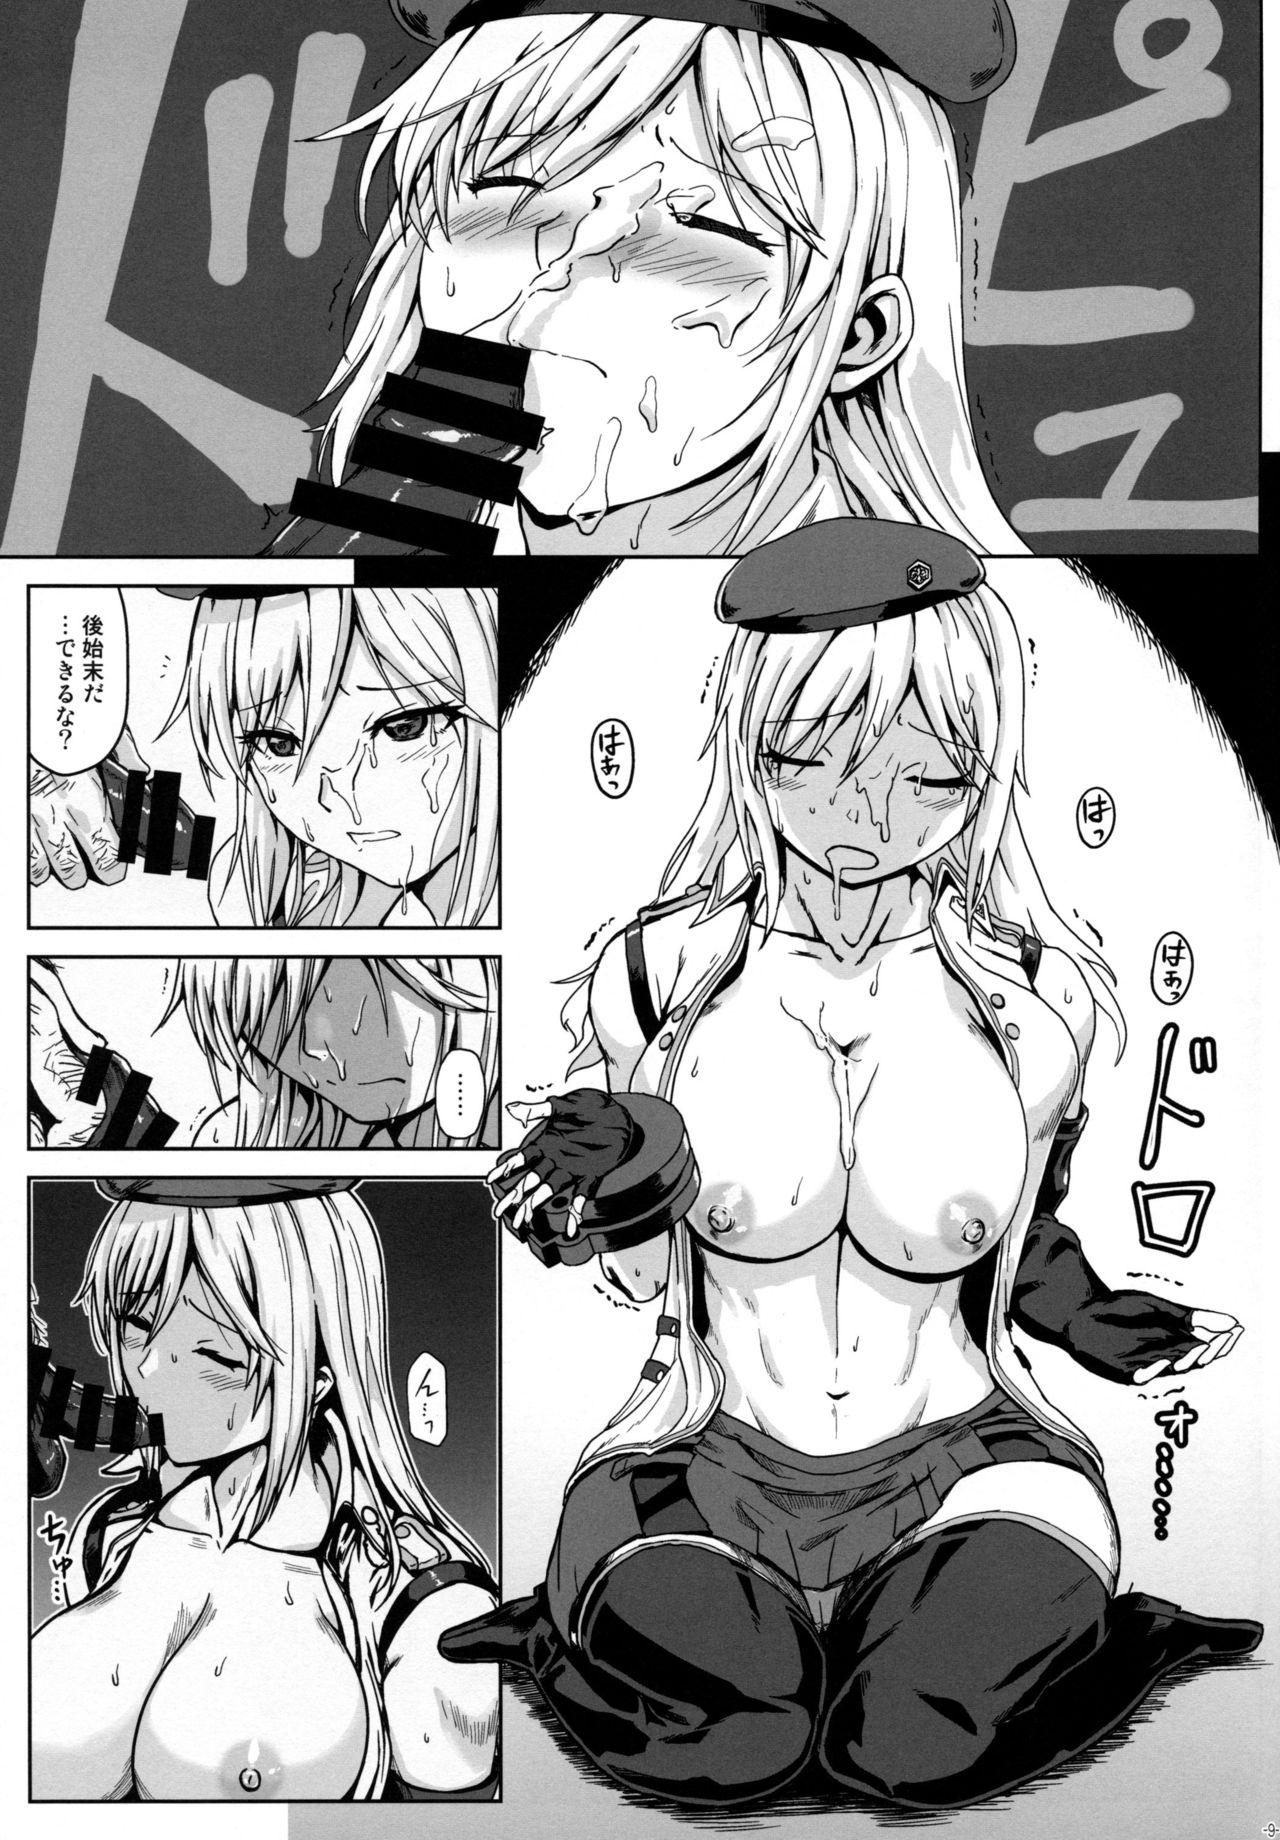 Nalgas (C97) [Lithium (Uchiga)] Again #7 "The Banquet of Madness (Mae)" (God Eater) - God eater Panties - Page 8